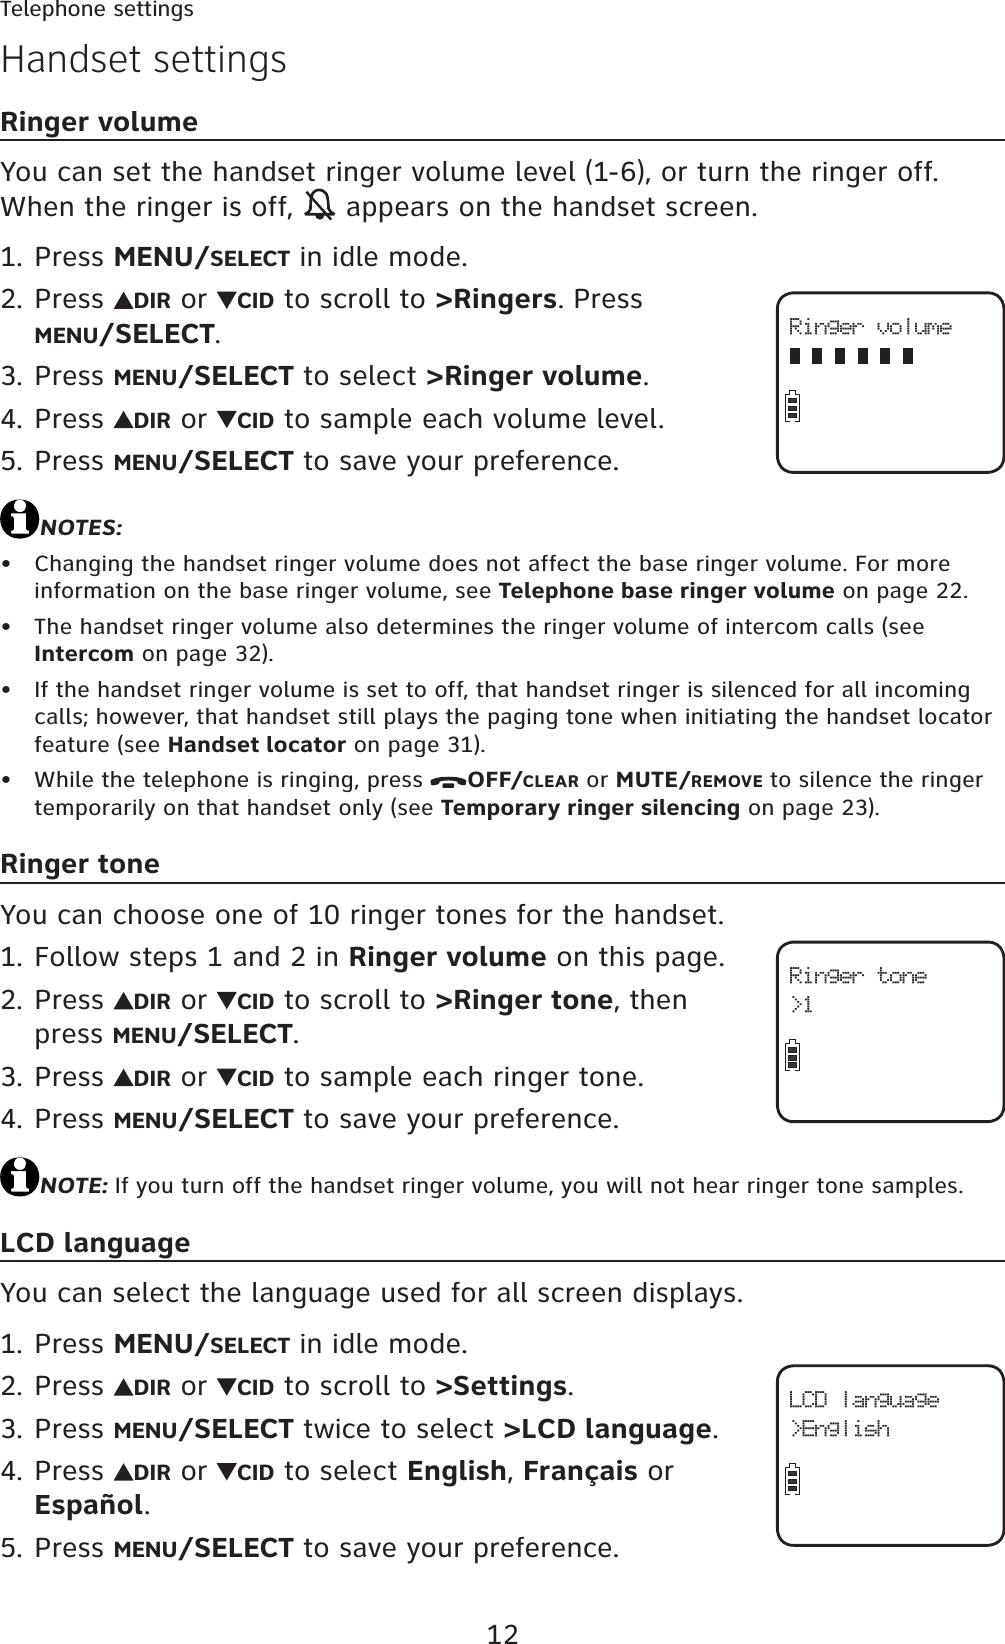 12Telephone settingsHandset settingsRinger volumeYou can set the handset ringer volume level (1-6), or turn the ringer off. When the ringer is off,   appears on the handset screen. Press MENU/SELECT in idle mode.Press  DIR or  CID to scroll to &gt;Ringers. Press MENU/SELECT.Press MENU/SELECT to select &gt;Ringer volume.Press  DIR or  CID to sample each volume level.Press MENU/SELECT to save your preference.NOTES:Changing the handset ringer volume does not affect the base ringer volume. For more information on the base ringer volume, see Telephone base ringer volume on page 22.The handset ringer volume also determines the ringer volume of intercom calls (see Intercom on page 32).If the handset ringer volume is set to off, that handset ringer is silenced for all incoming calls; however, that handset still plays the paging tone when initiating the handset locator feature (see Handset locator on page 31).While the telephone is ringing, press  OFF/CLEAR or MUTE/REMOVE to silence the ringer temporarily on that handset only (see Temporary ringer silencing on page 23).Ringer toneYou can choose one of 10 ringer tones for the handset.Follow steps 1 and 2 in Ringer volume on this page.Press  DIR or  CID to scroll to &gt;Ringer tone, then press MENU/SELECT.Press  DIR or  CID to sample each ringer tone.Press MENU/SELECT to save your preference.NOTE: If you turn off the handset ringer volume, you will not hear ringer tone samples.LCD languageYou can select the language used for all screen displays.Press MENU/SELECT in idle mode.Press  DIR or  CID to scroll to &gt;Settings.Press MENU/SELECT twice to select &gt;LCD language.Press  DIR or  CID to select English,Français or Español.Press MENU/SELECT to save your preference.1.2.3.4.5.••••1.2.3.4.1.2.3.4.5.Ringer volumeRinger tone&gt;1LCD language&gt;English